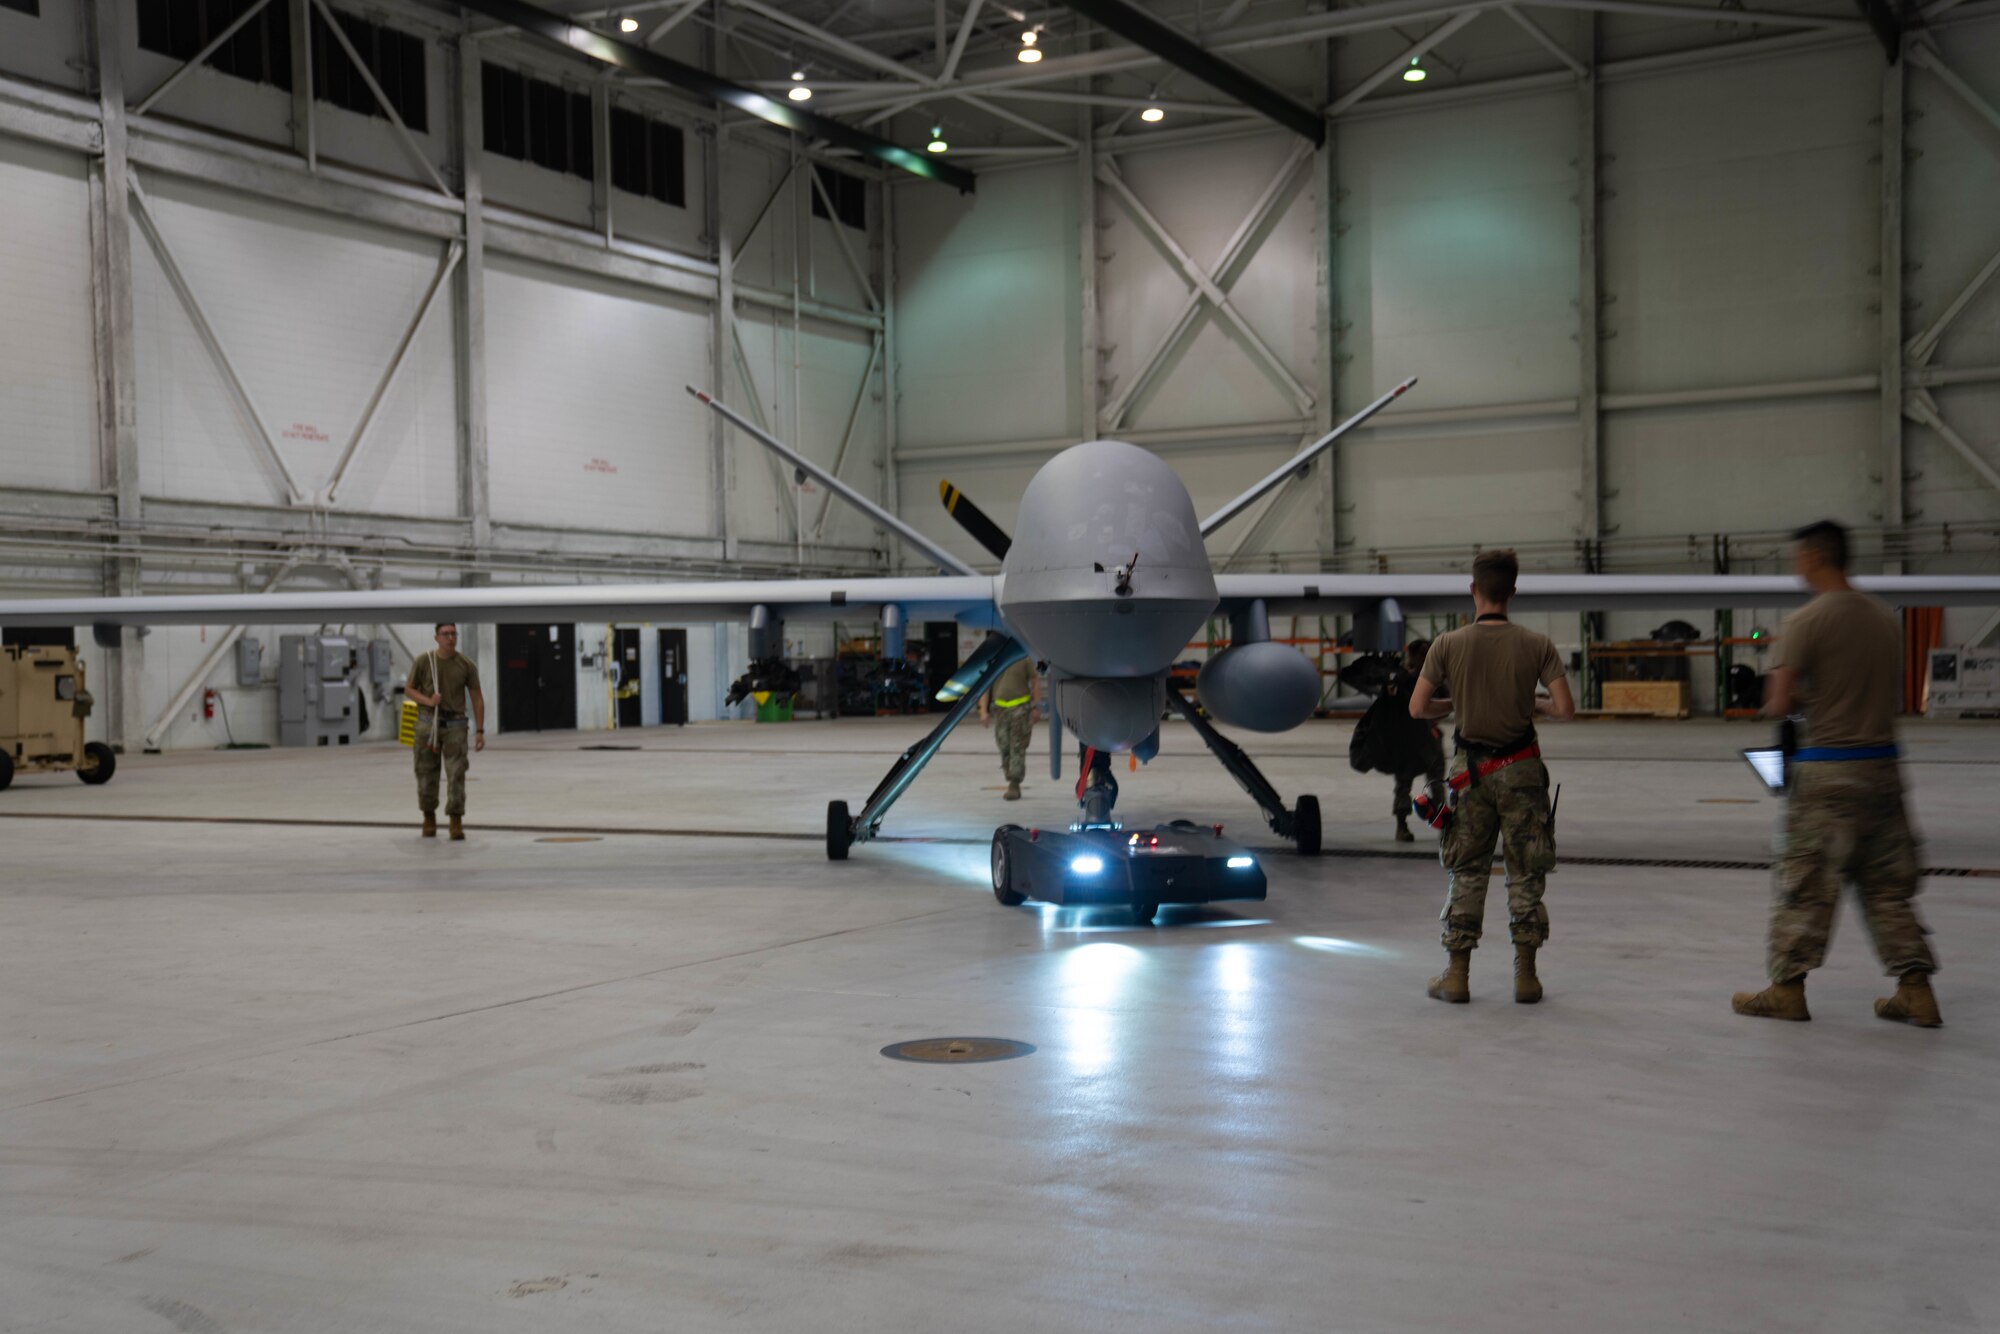 MARINE CORPS BASE HAWAII, Hawaii (July 13, 2022) - U.S. Air Force maintenance specialists, assigned to the 29th Air Maintenance Unit, tow the MQ-9A Reaper through the hangar at Marine Corps Air Station Kaneohe Bay during Rim of the Pacific (RIMPAC) 2022, July 13. Unmanned and remotely operated vessels extend the capability of interconnected manned platform sensors to enhance the warfighting capacity of multinational joint task forces. Twenty-six nations, 38 ships, four submarines, more than 170 aircraft and 25,000 personnel are participating in RIMPAC from June 29 to Aug. 4 in and around the Hawaiian Islands and Southern California. The world's largest international maritime exercise, RIMPAC provides a unique training opportunity while fostering and sustaining cooperative relationships among participants critical to ensuring the safety of sea lanes and security on the world's oceans. RIMPAC 2022 is the 28th exercise in the series that began in 1971. (U.S. Air Force photo by Airman 1st Class Ariel O'Shea)